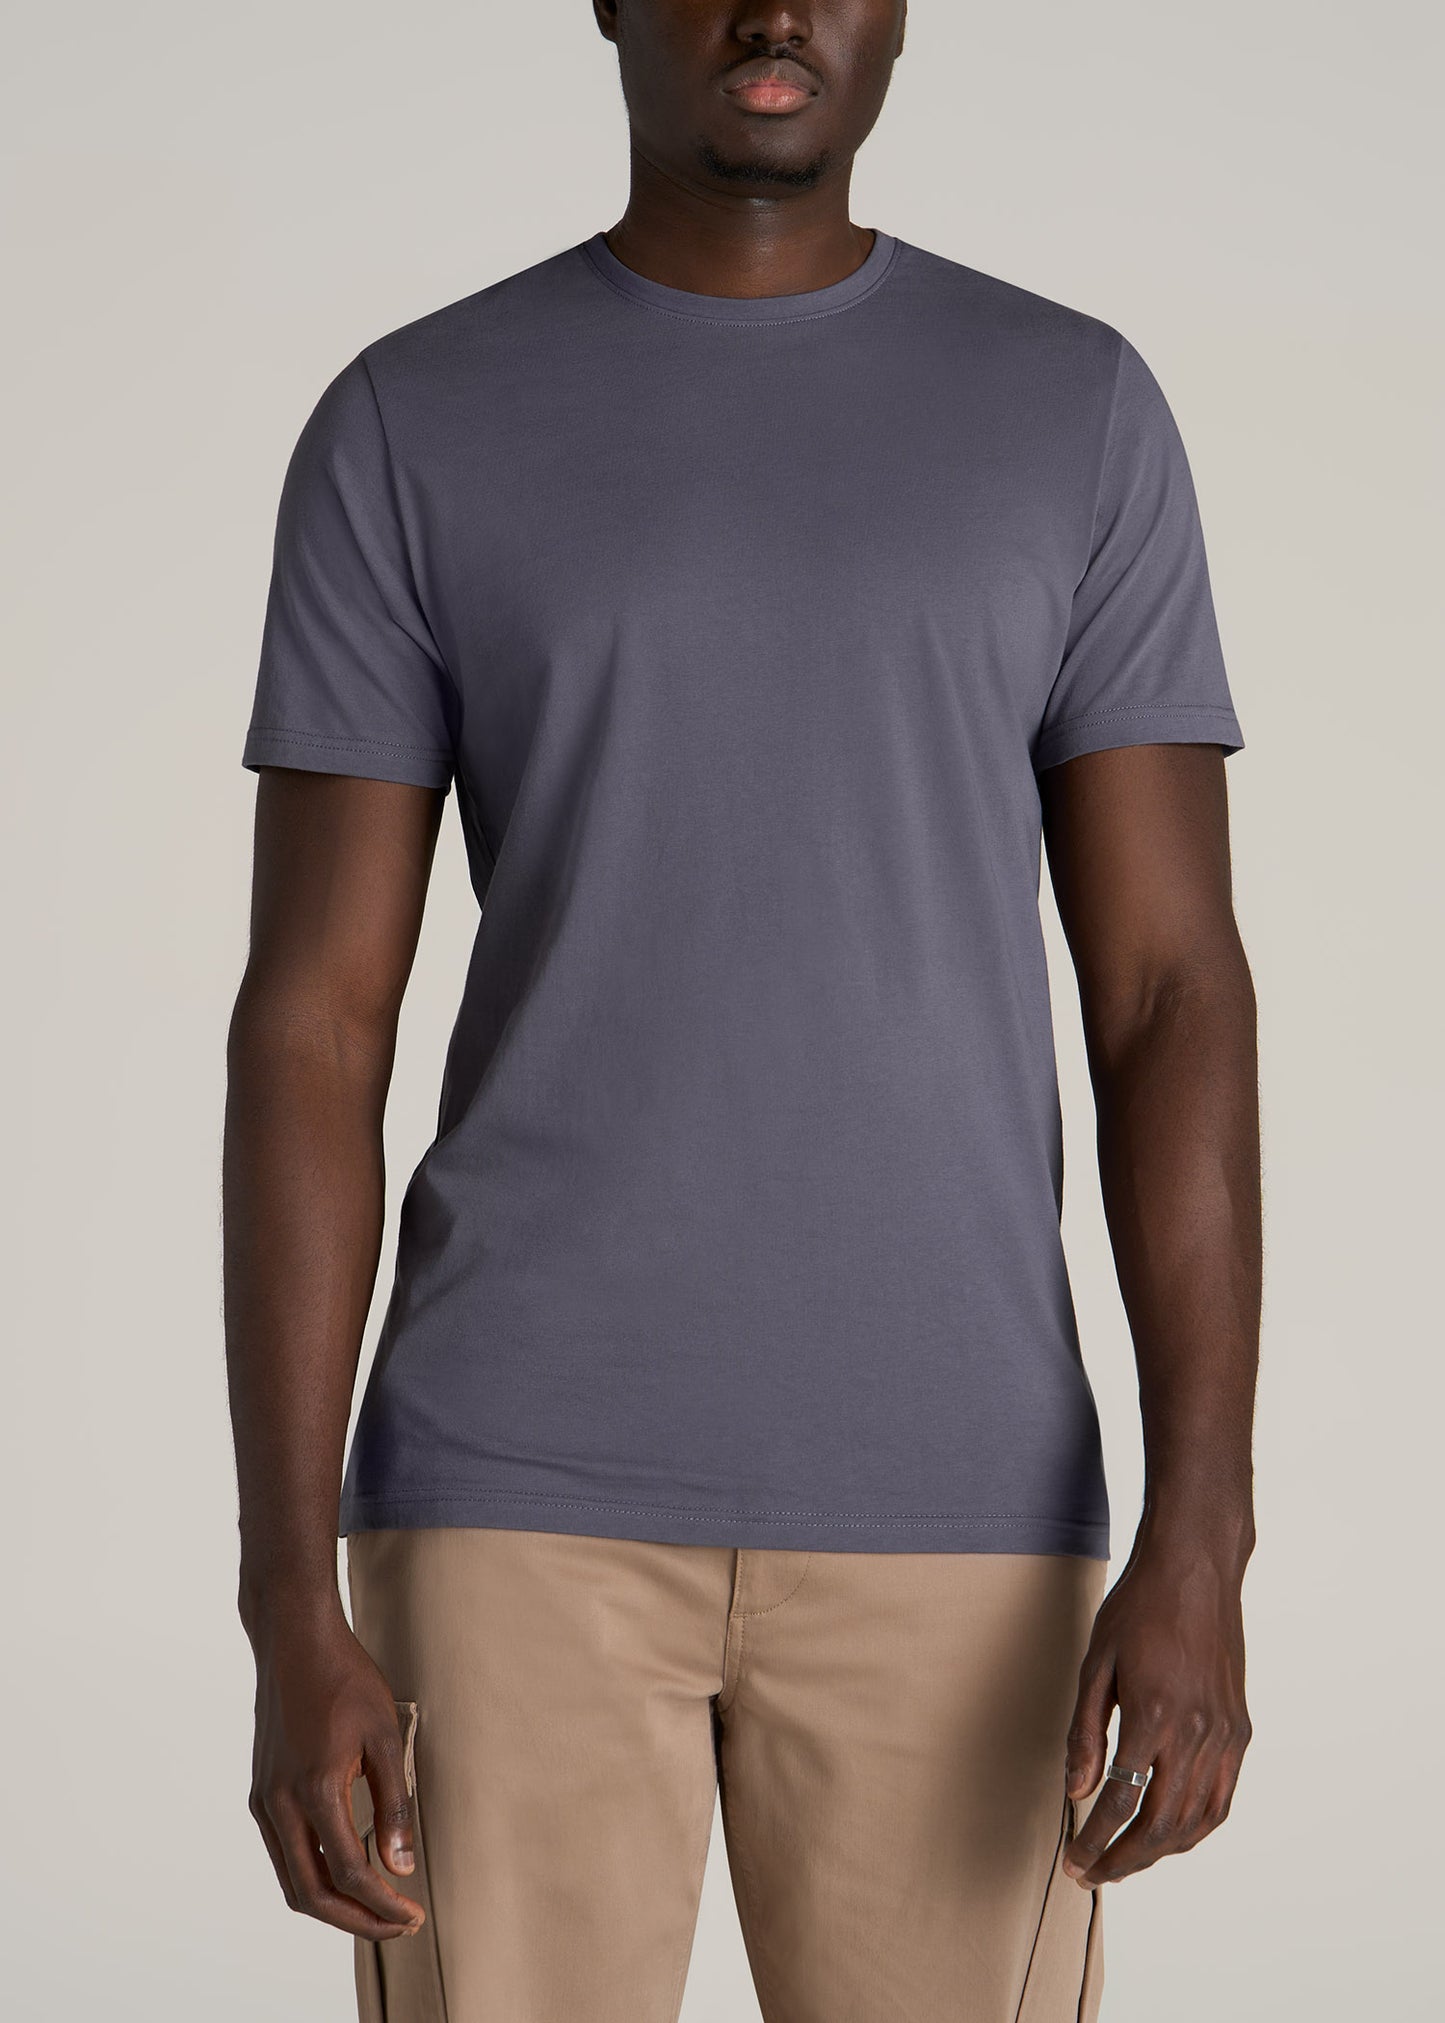 American-Tall-Men-Everyday-Cotton-Regular-Fit-Tee-Crew-Neck-Grey-Blue-front